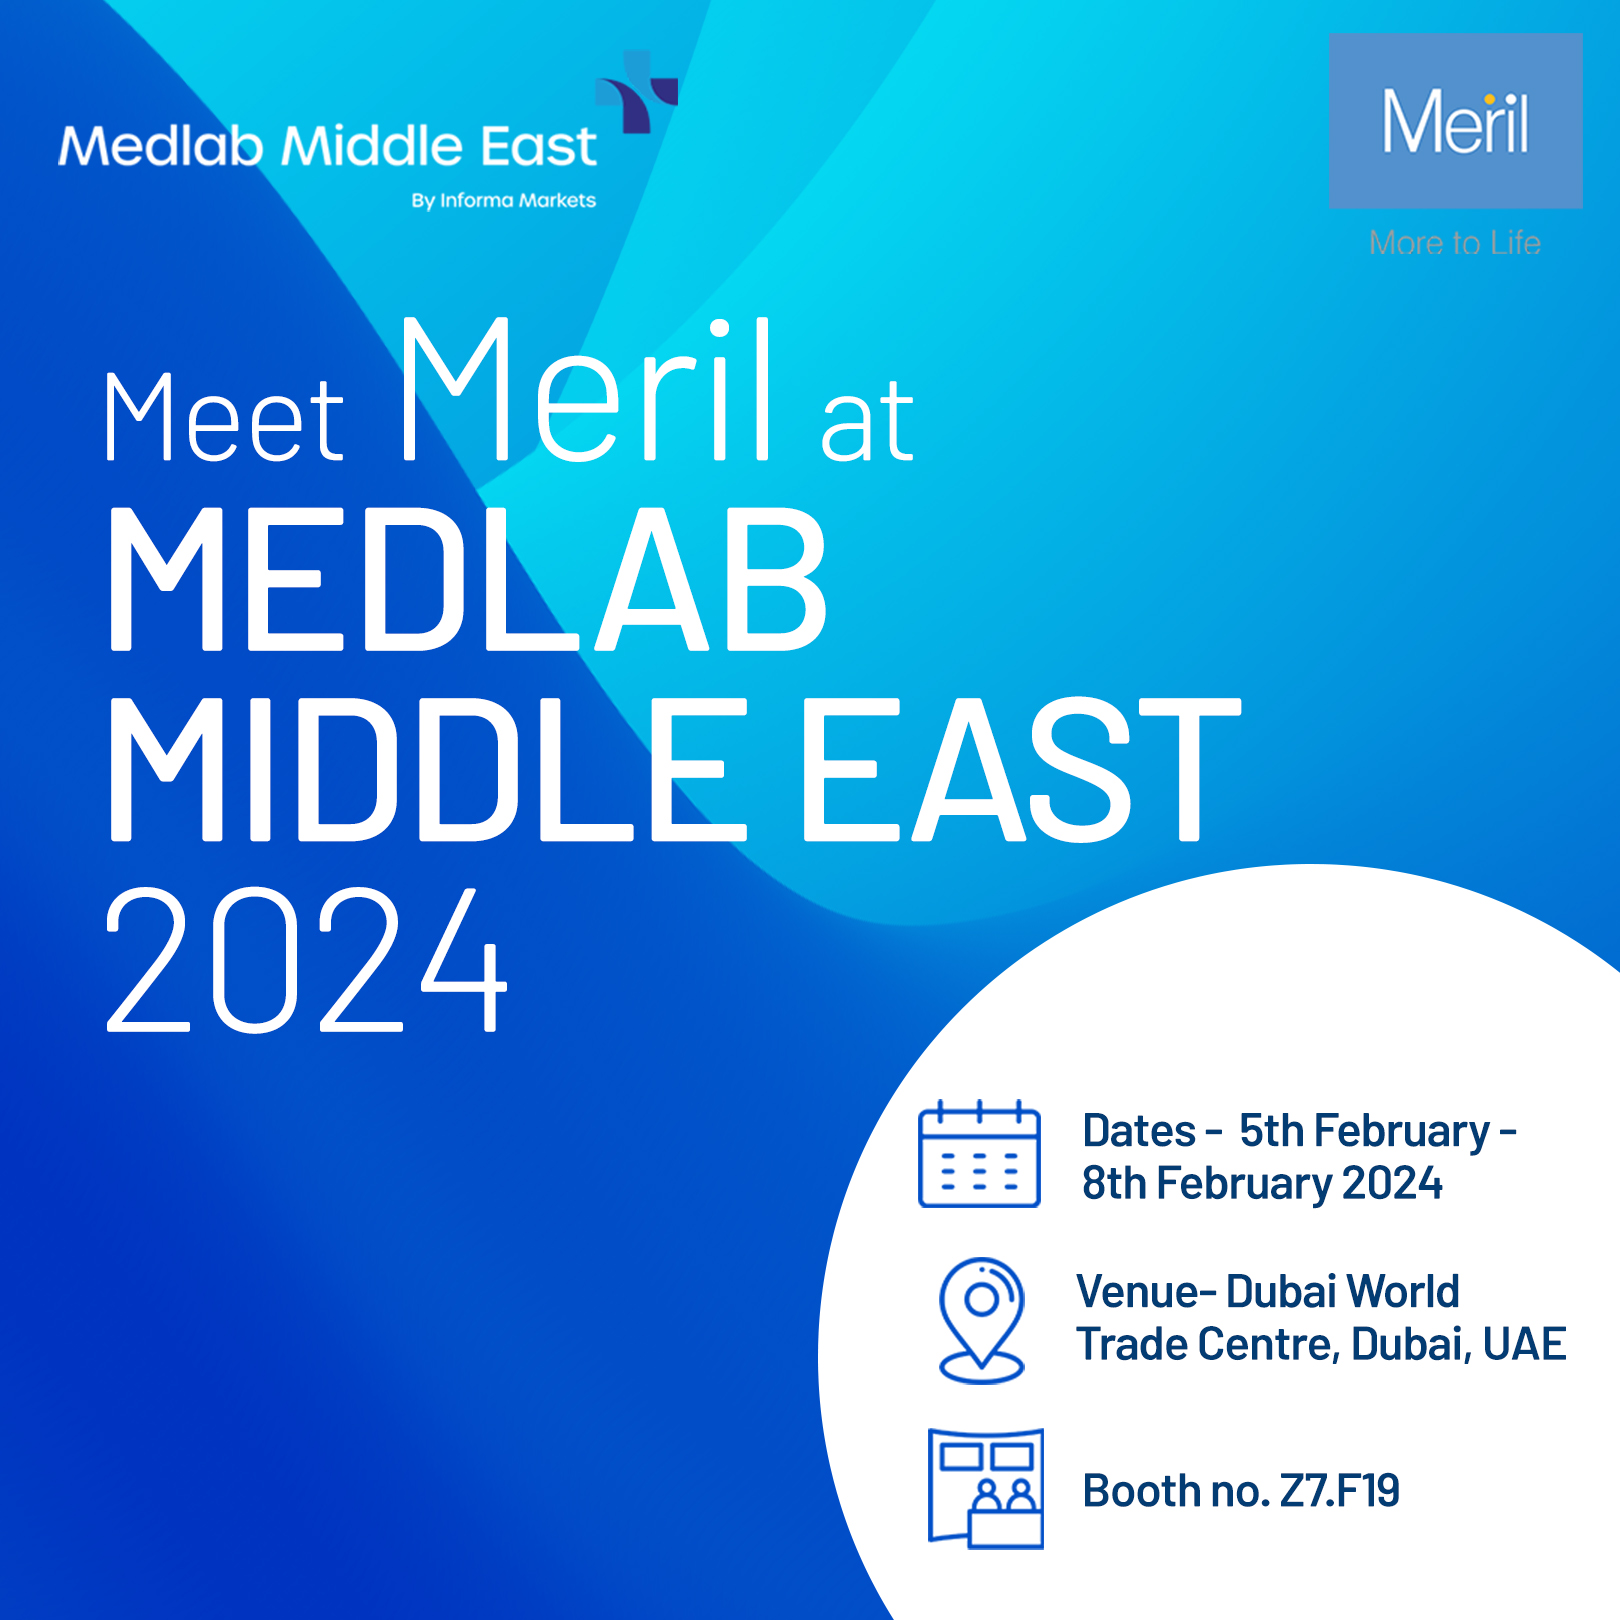 Join Meril at Medlab Middle East 2024! Save the dates!